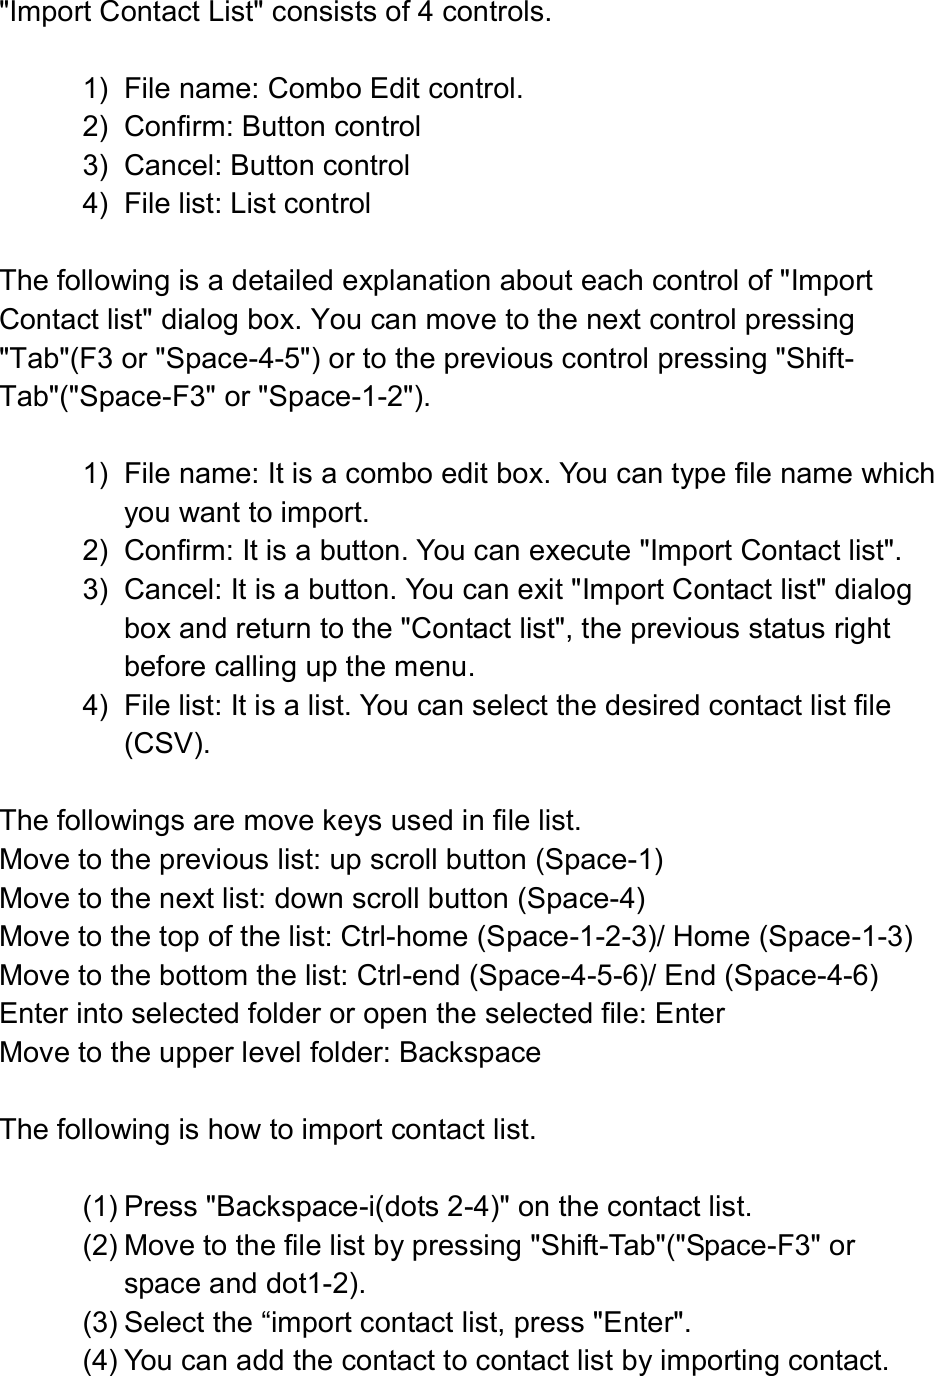   &quot;Import Contact List&quot; consists of 4 controls.  1)  File name: Combo Edit control. 2)  Confirm: Button control 3)  Cancel: Button control 4)  File list: List control  The following is a detailed explanation about each control of &quot;Import Contact list&quot; dialog box. You can move to the next control pressing &quot;Tab&quot;(F3 or &quot;Space-4-5&quot;) or to the previous control pressing &quot;Shift-Tab&quot;(&quot;Space-F3&quot; or &quot;Space-1-2&quot;).    1)  File name: It is a combo edit box. You can type file name which you want to import.   2)  Confirm: It is a button. You can execute &quot;Import Contact list&quot;. 3)  Cancel: It is a button. You can exit &quot;Import Contact list&quot; dialog box and return to the &quot;Contact list&quot;, the previous status right before calling up the menu.   4)  File list: It is a list. You can select the desired contact list file (CSV).    The followings are move keys used in file list.   Move to the previous list: up scroll button (Space-1) Move to the next list: down scroll button (Space-4) Move to the top of the list: Ctrl-home (Space-1-2-3)/ Home (Space-1-3) Move to the bottom the list: Ctrl-end (Space-4-5-6)/ End (Space-4-6) Enter into selected folder or open the selected file: Enter Move to the upper level folder: Backspace  The following is how to import contact list.    (1) Press &quot;Backspace-i(dots 2-4)&quot; on the contact list.   (2) Move to the file list by pressing &quot;Shift-Tab&quot;(&quot;Space-F3&quot; or space and dot1-2). (3) Select the “import contact list, press &quot;Enter&quot;.   (4) You can add the contact to contact list by importing contact.   